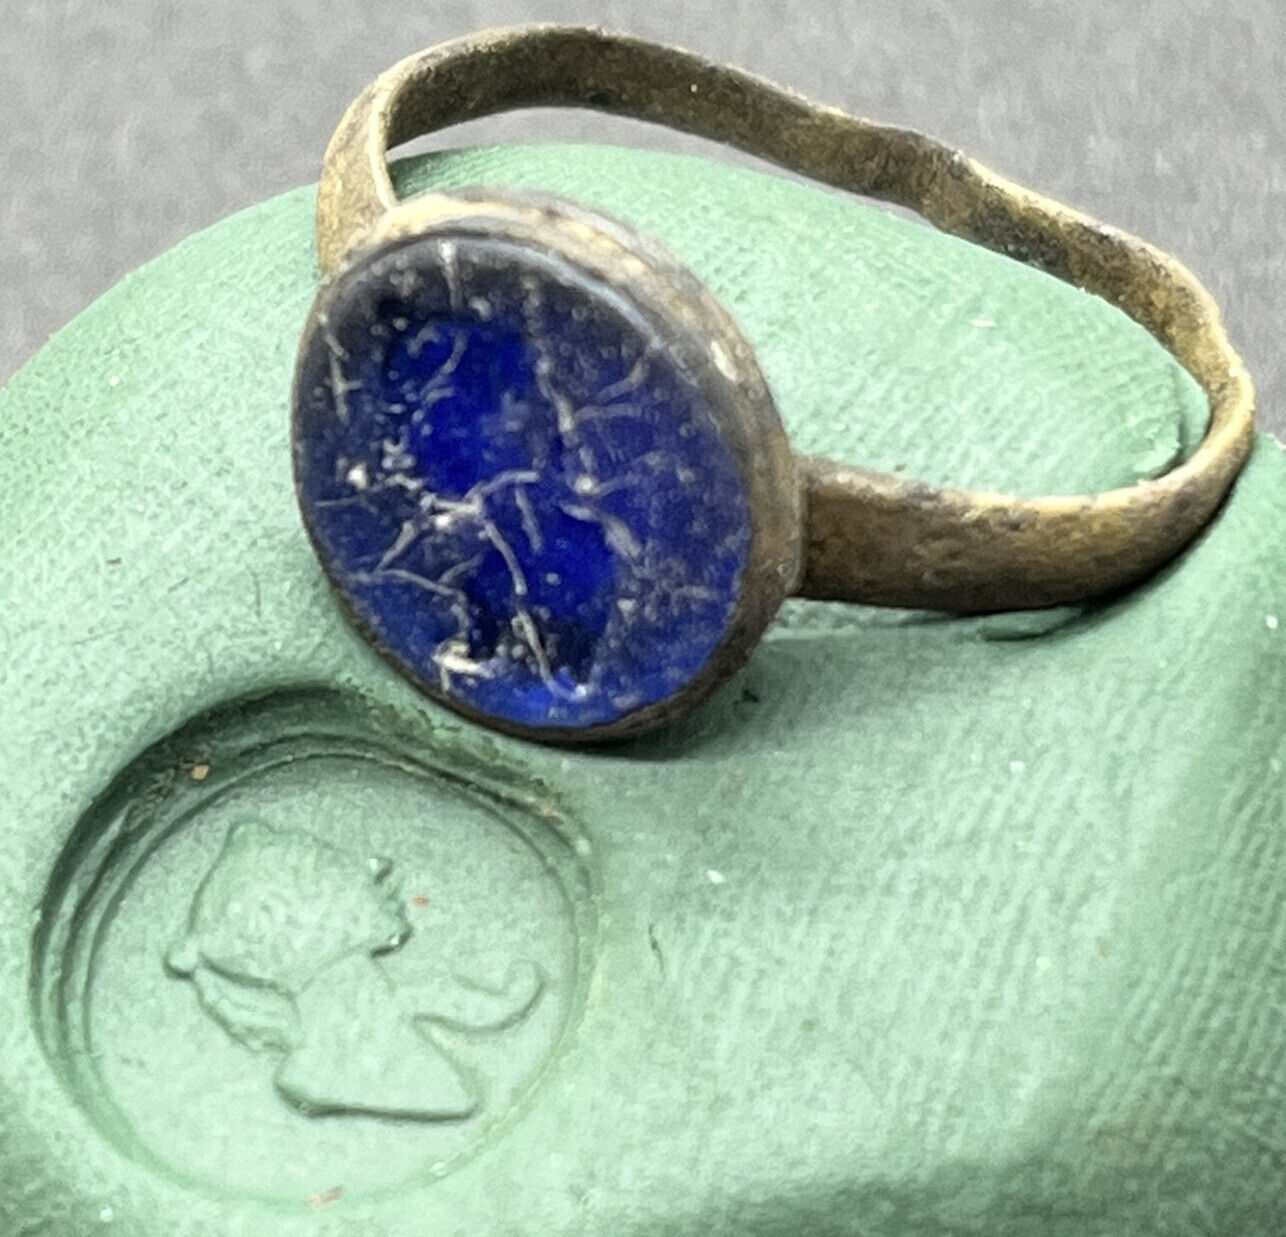 RARE Medieval Ring W/ Glass Intaglio Bust - Intact - Circa 1400-1600’s AD Old B